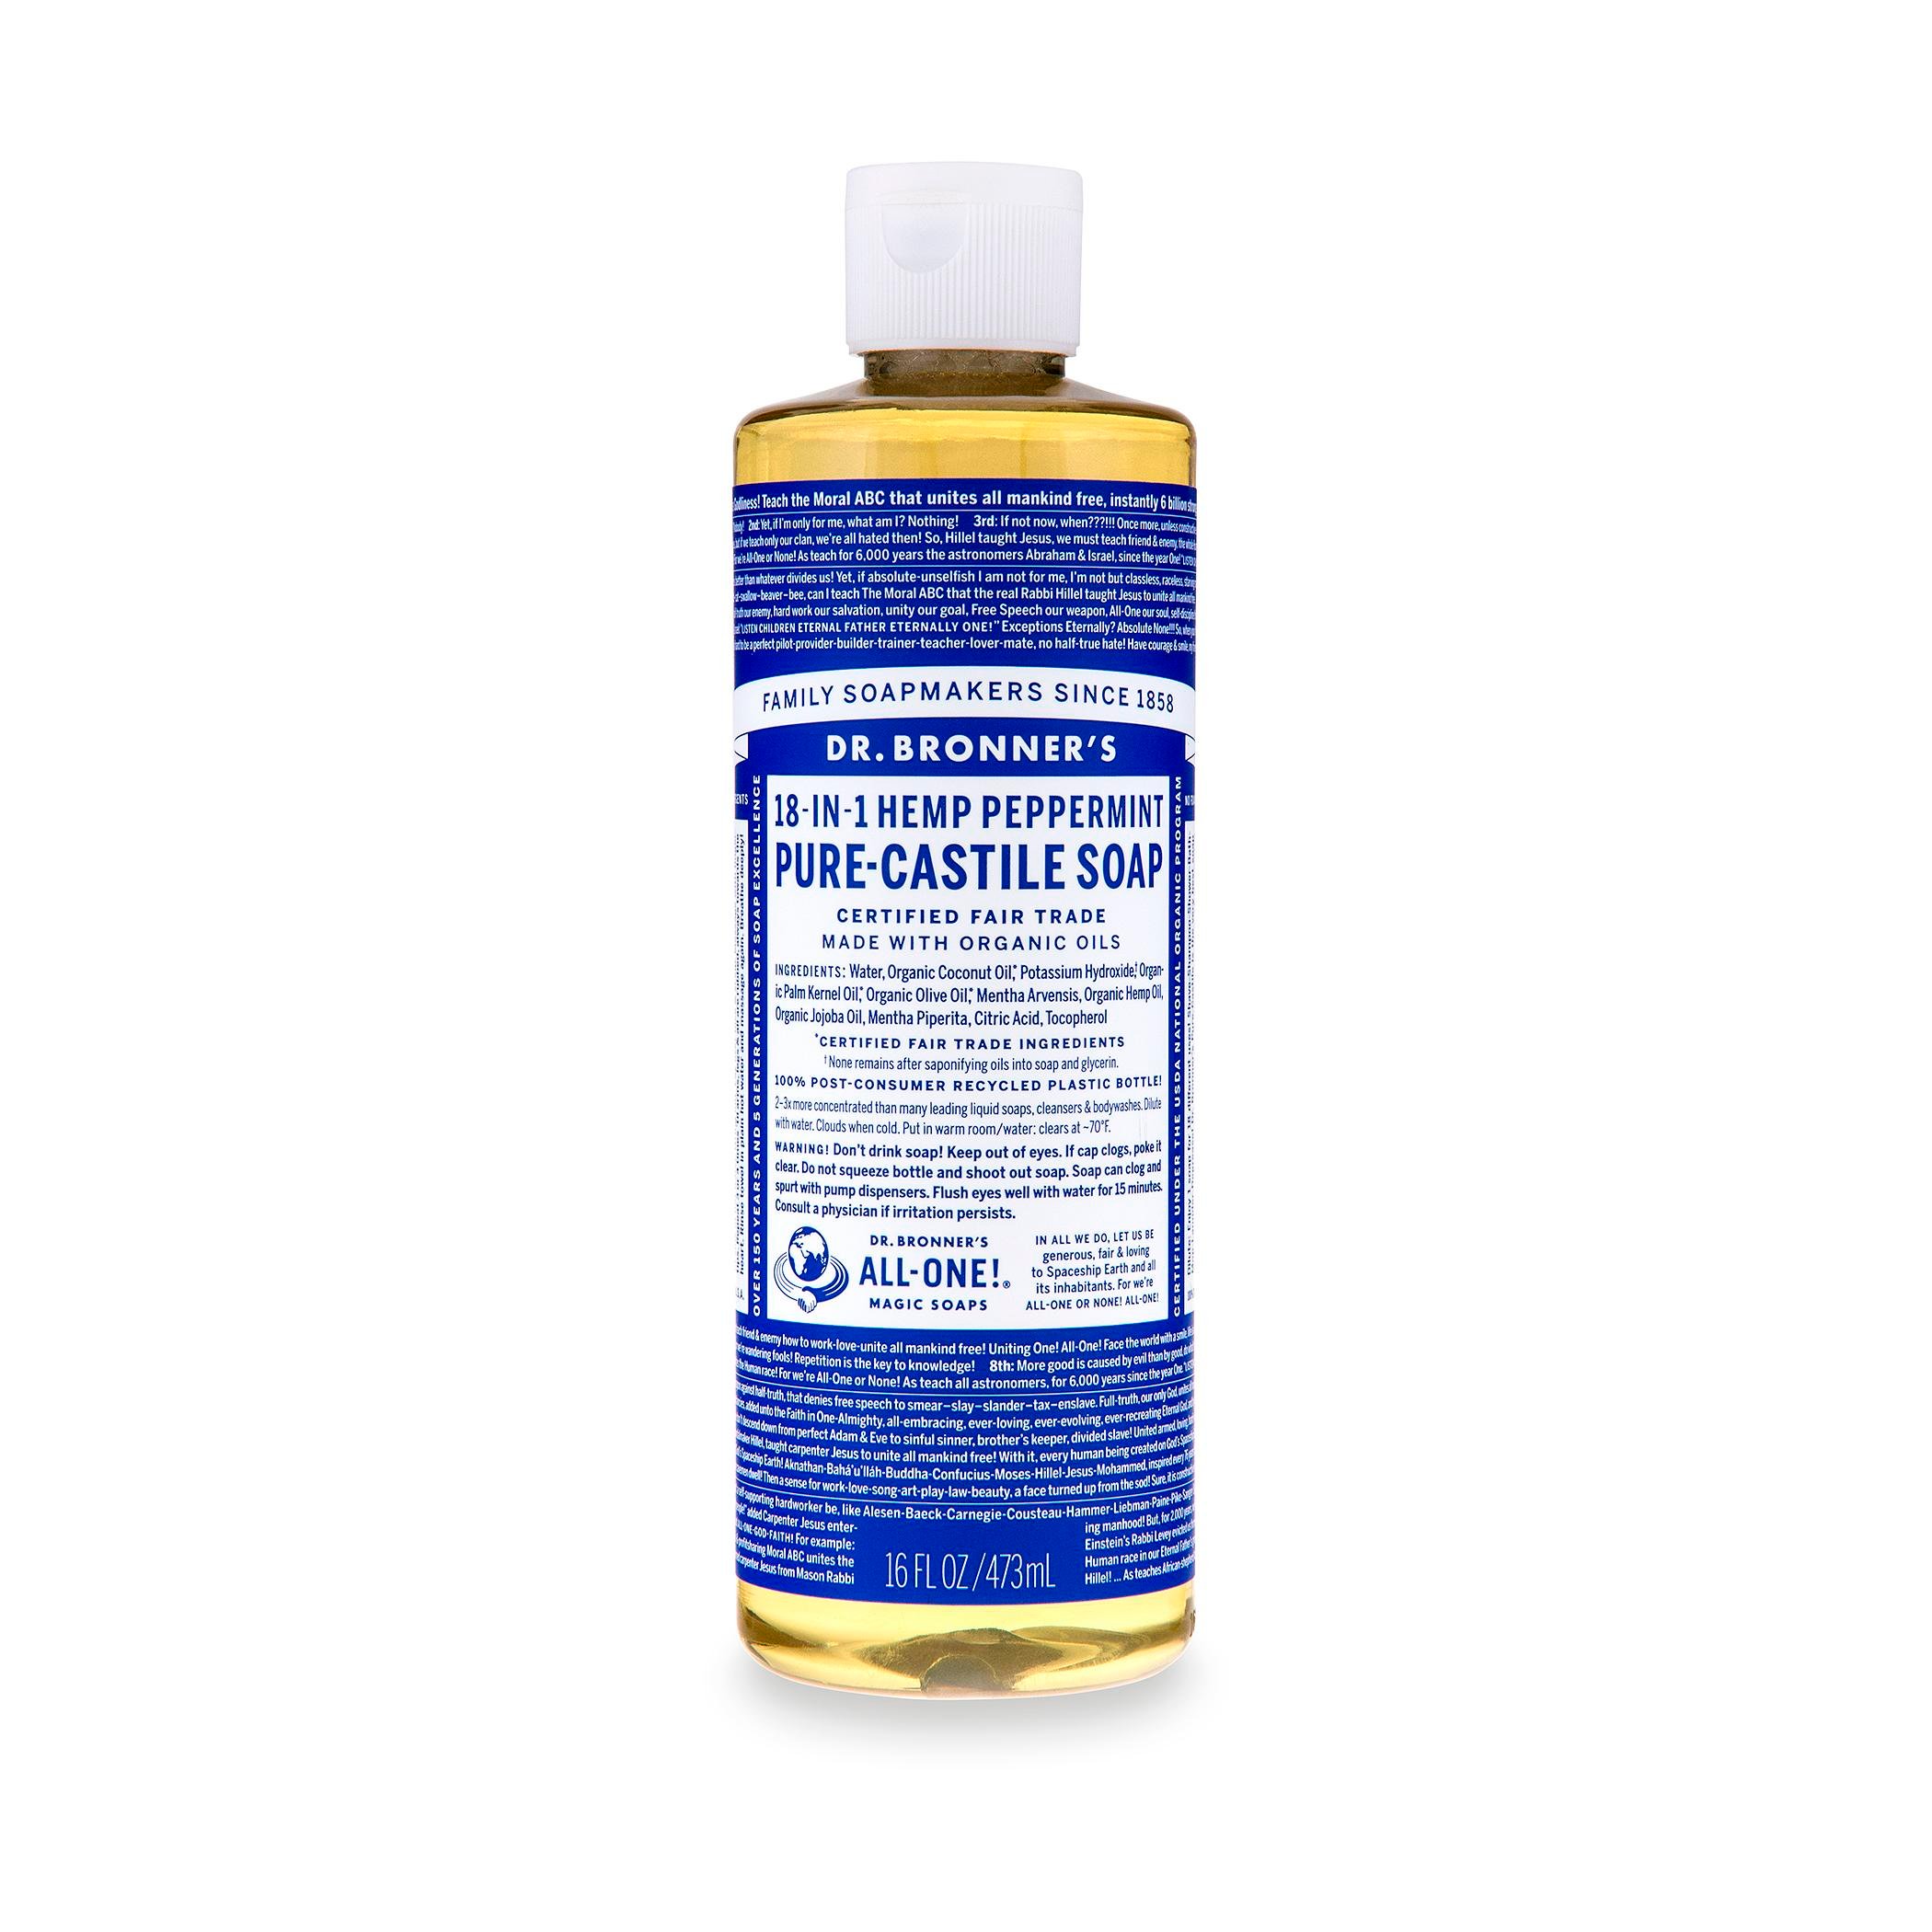 Dr. Bronner's - You can still order the limited-time Ocean Bubble